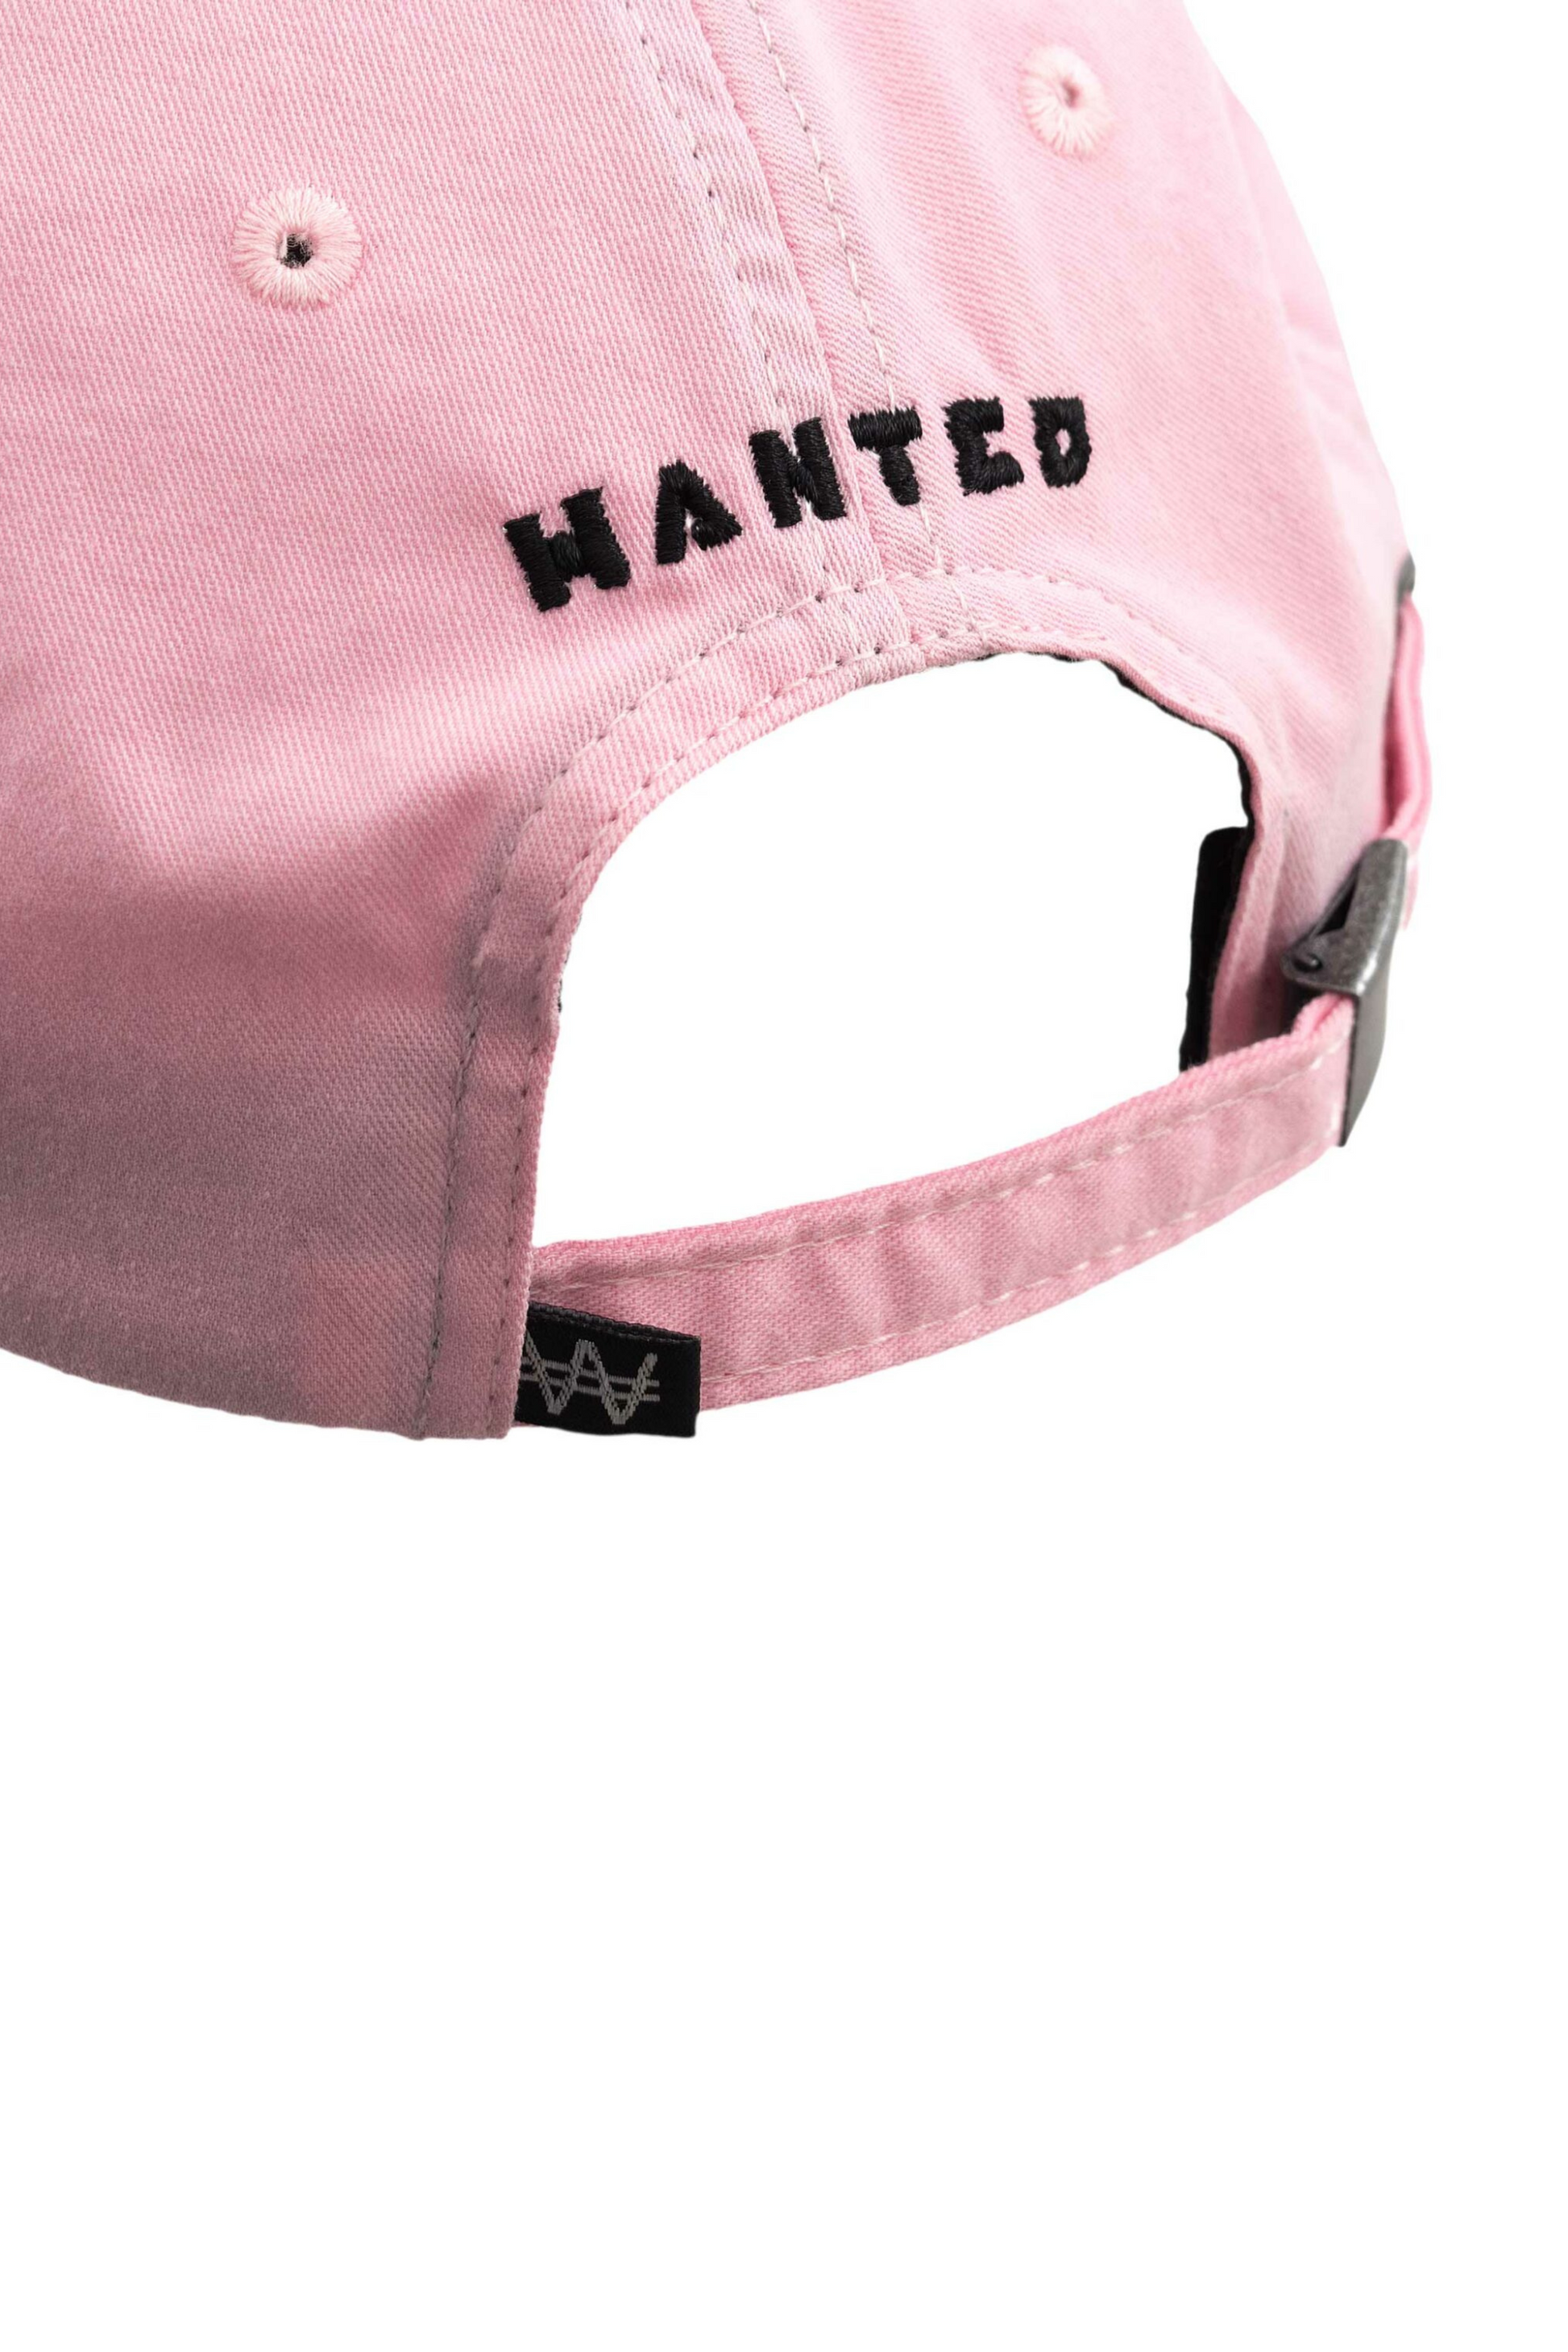 Boné Wanted Polo Hat - Pink (6937561989300)